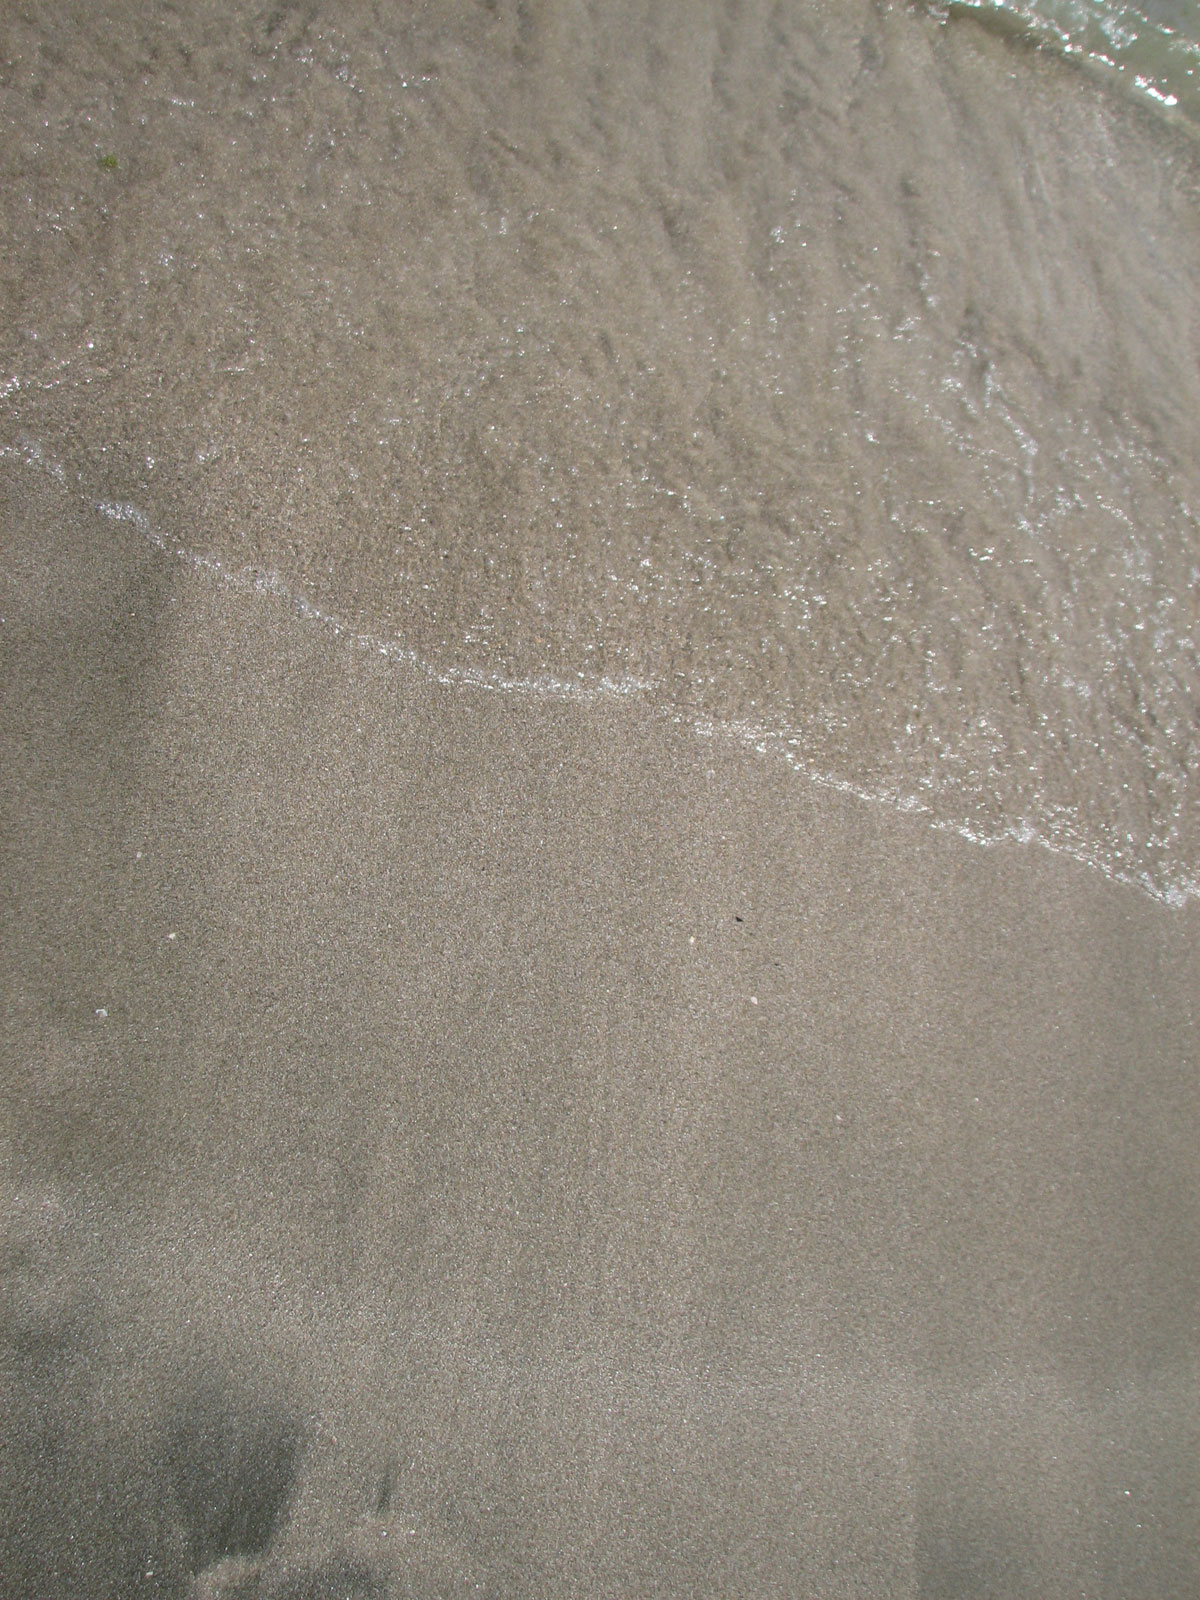 Sand-water-01 by 